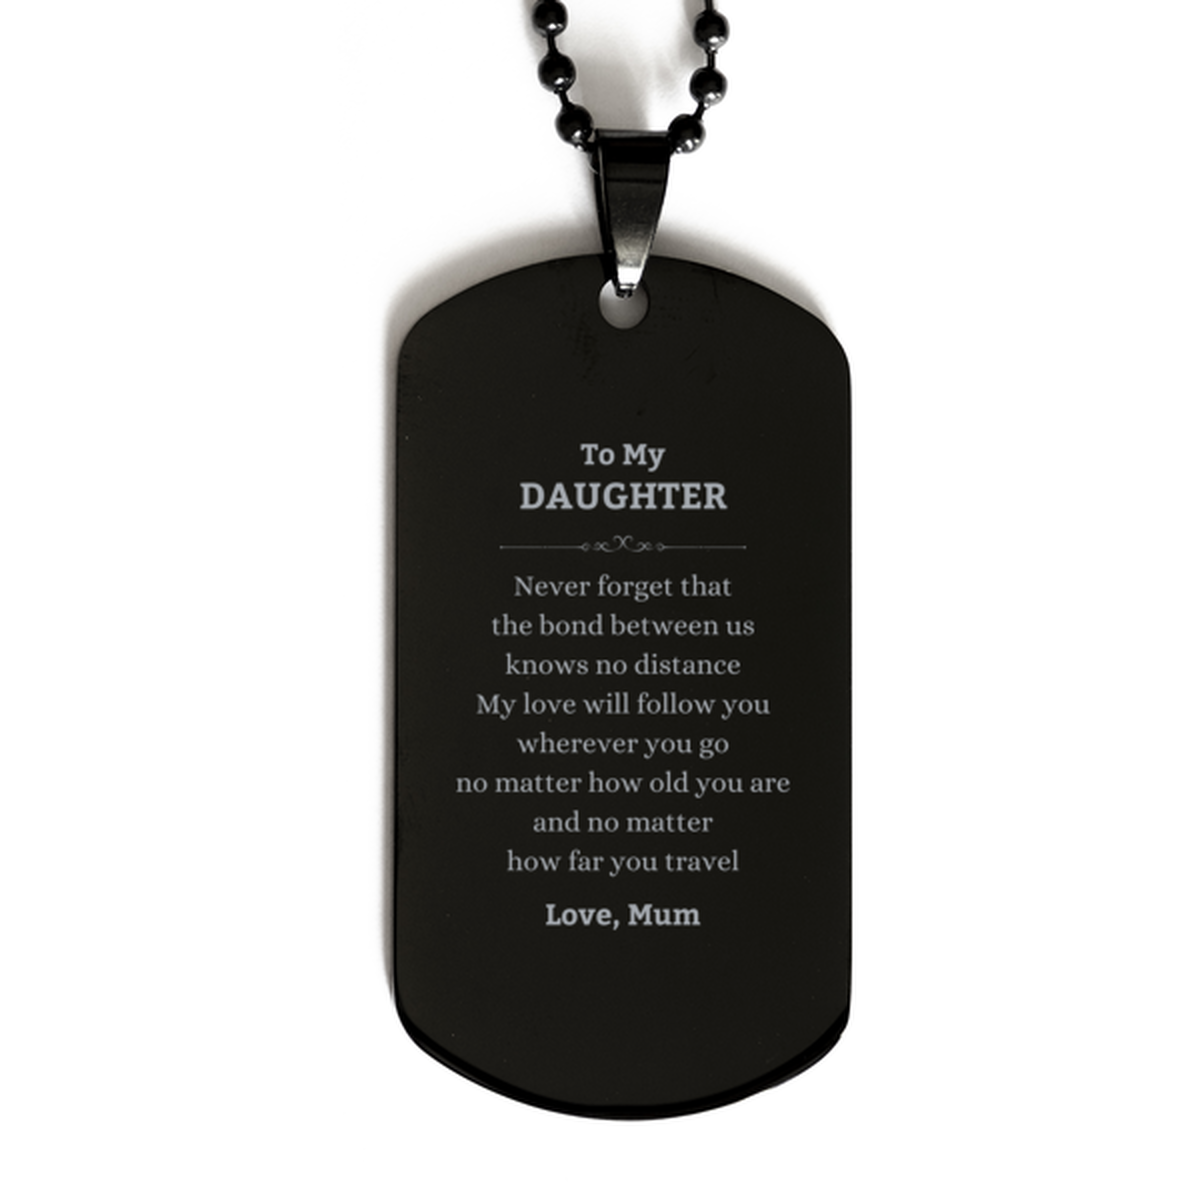 Daughter Birthday Gifts from Mum, Adjustable Black Dog Tag for Daughter Christmas Graduation Unique Gifts Daughter Never forget that the bond between us knows no distance. Love, Mum